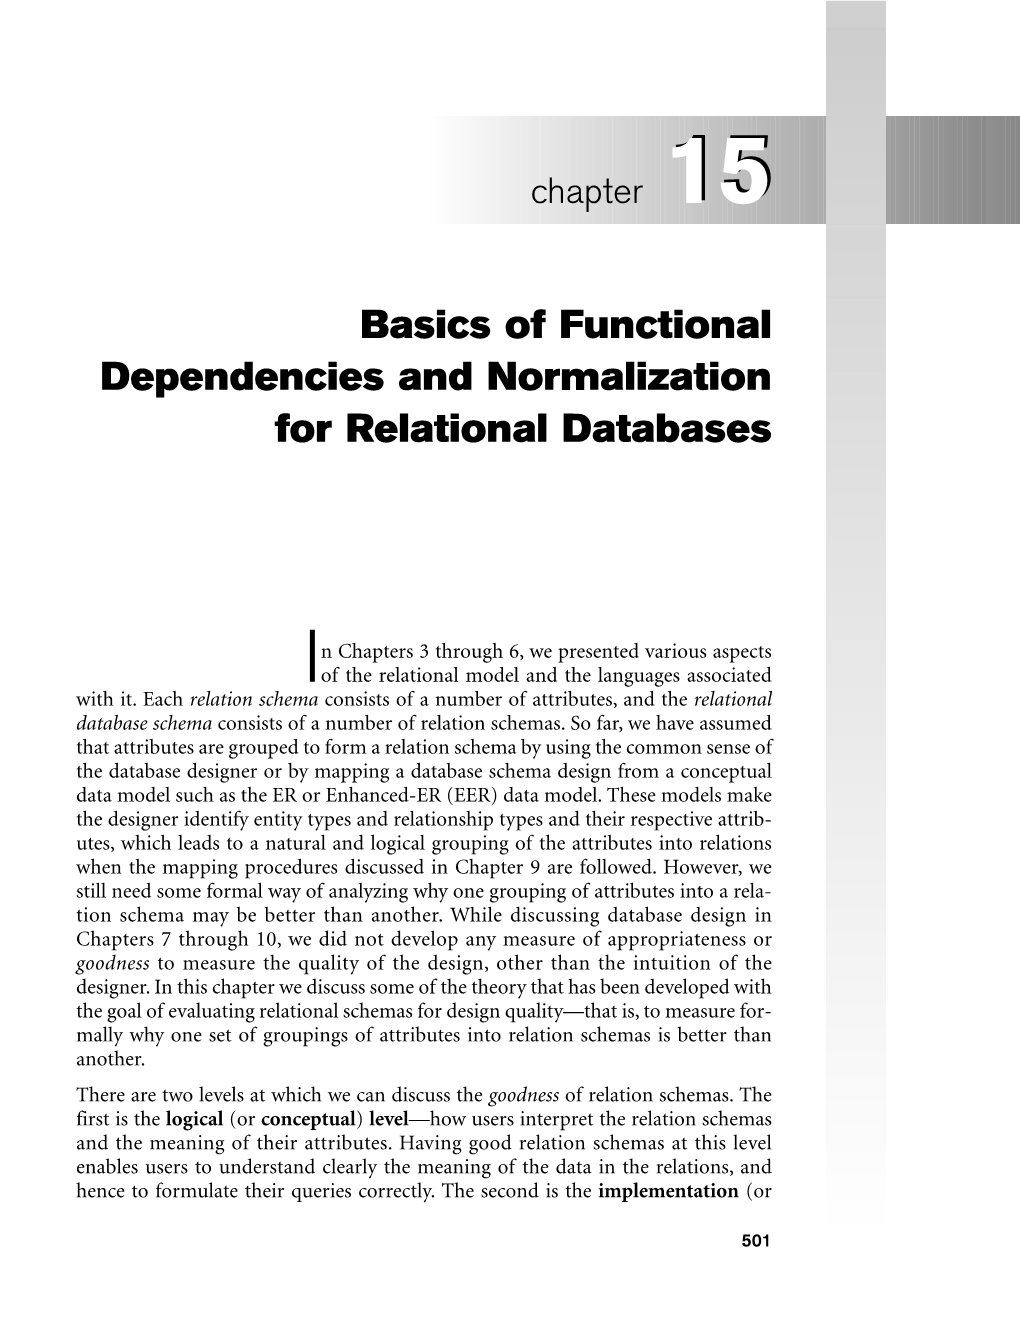 Basics of Functional Dependencies and Normalization for Relational Databases